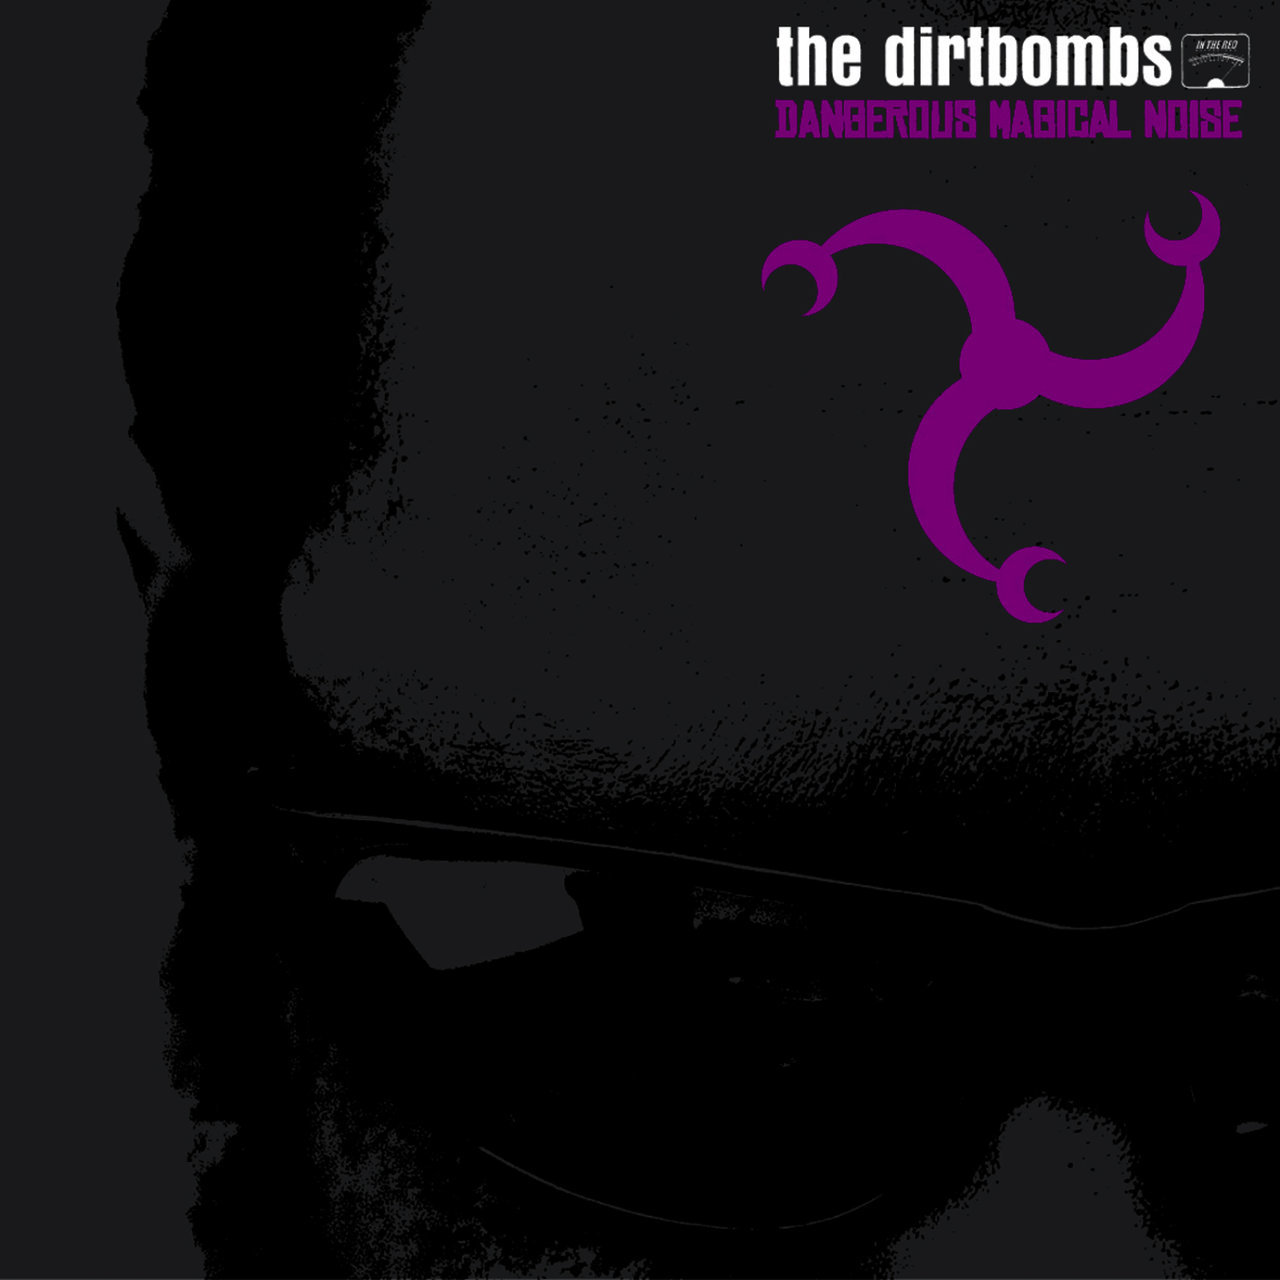 THE DIRTBOMBS - Dangerous Magical Noise